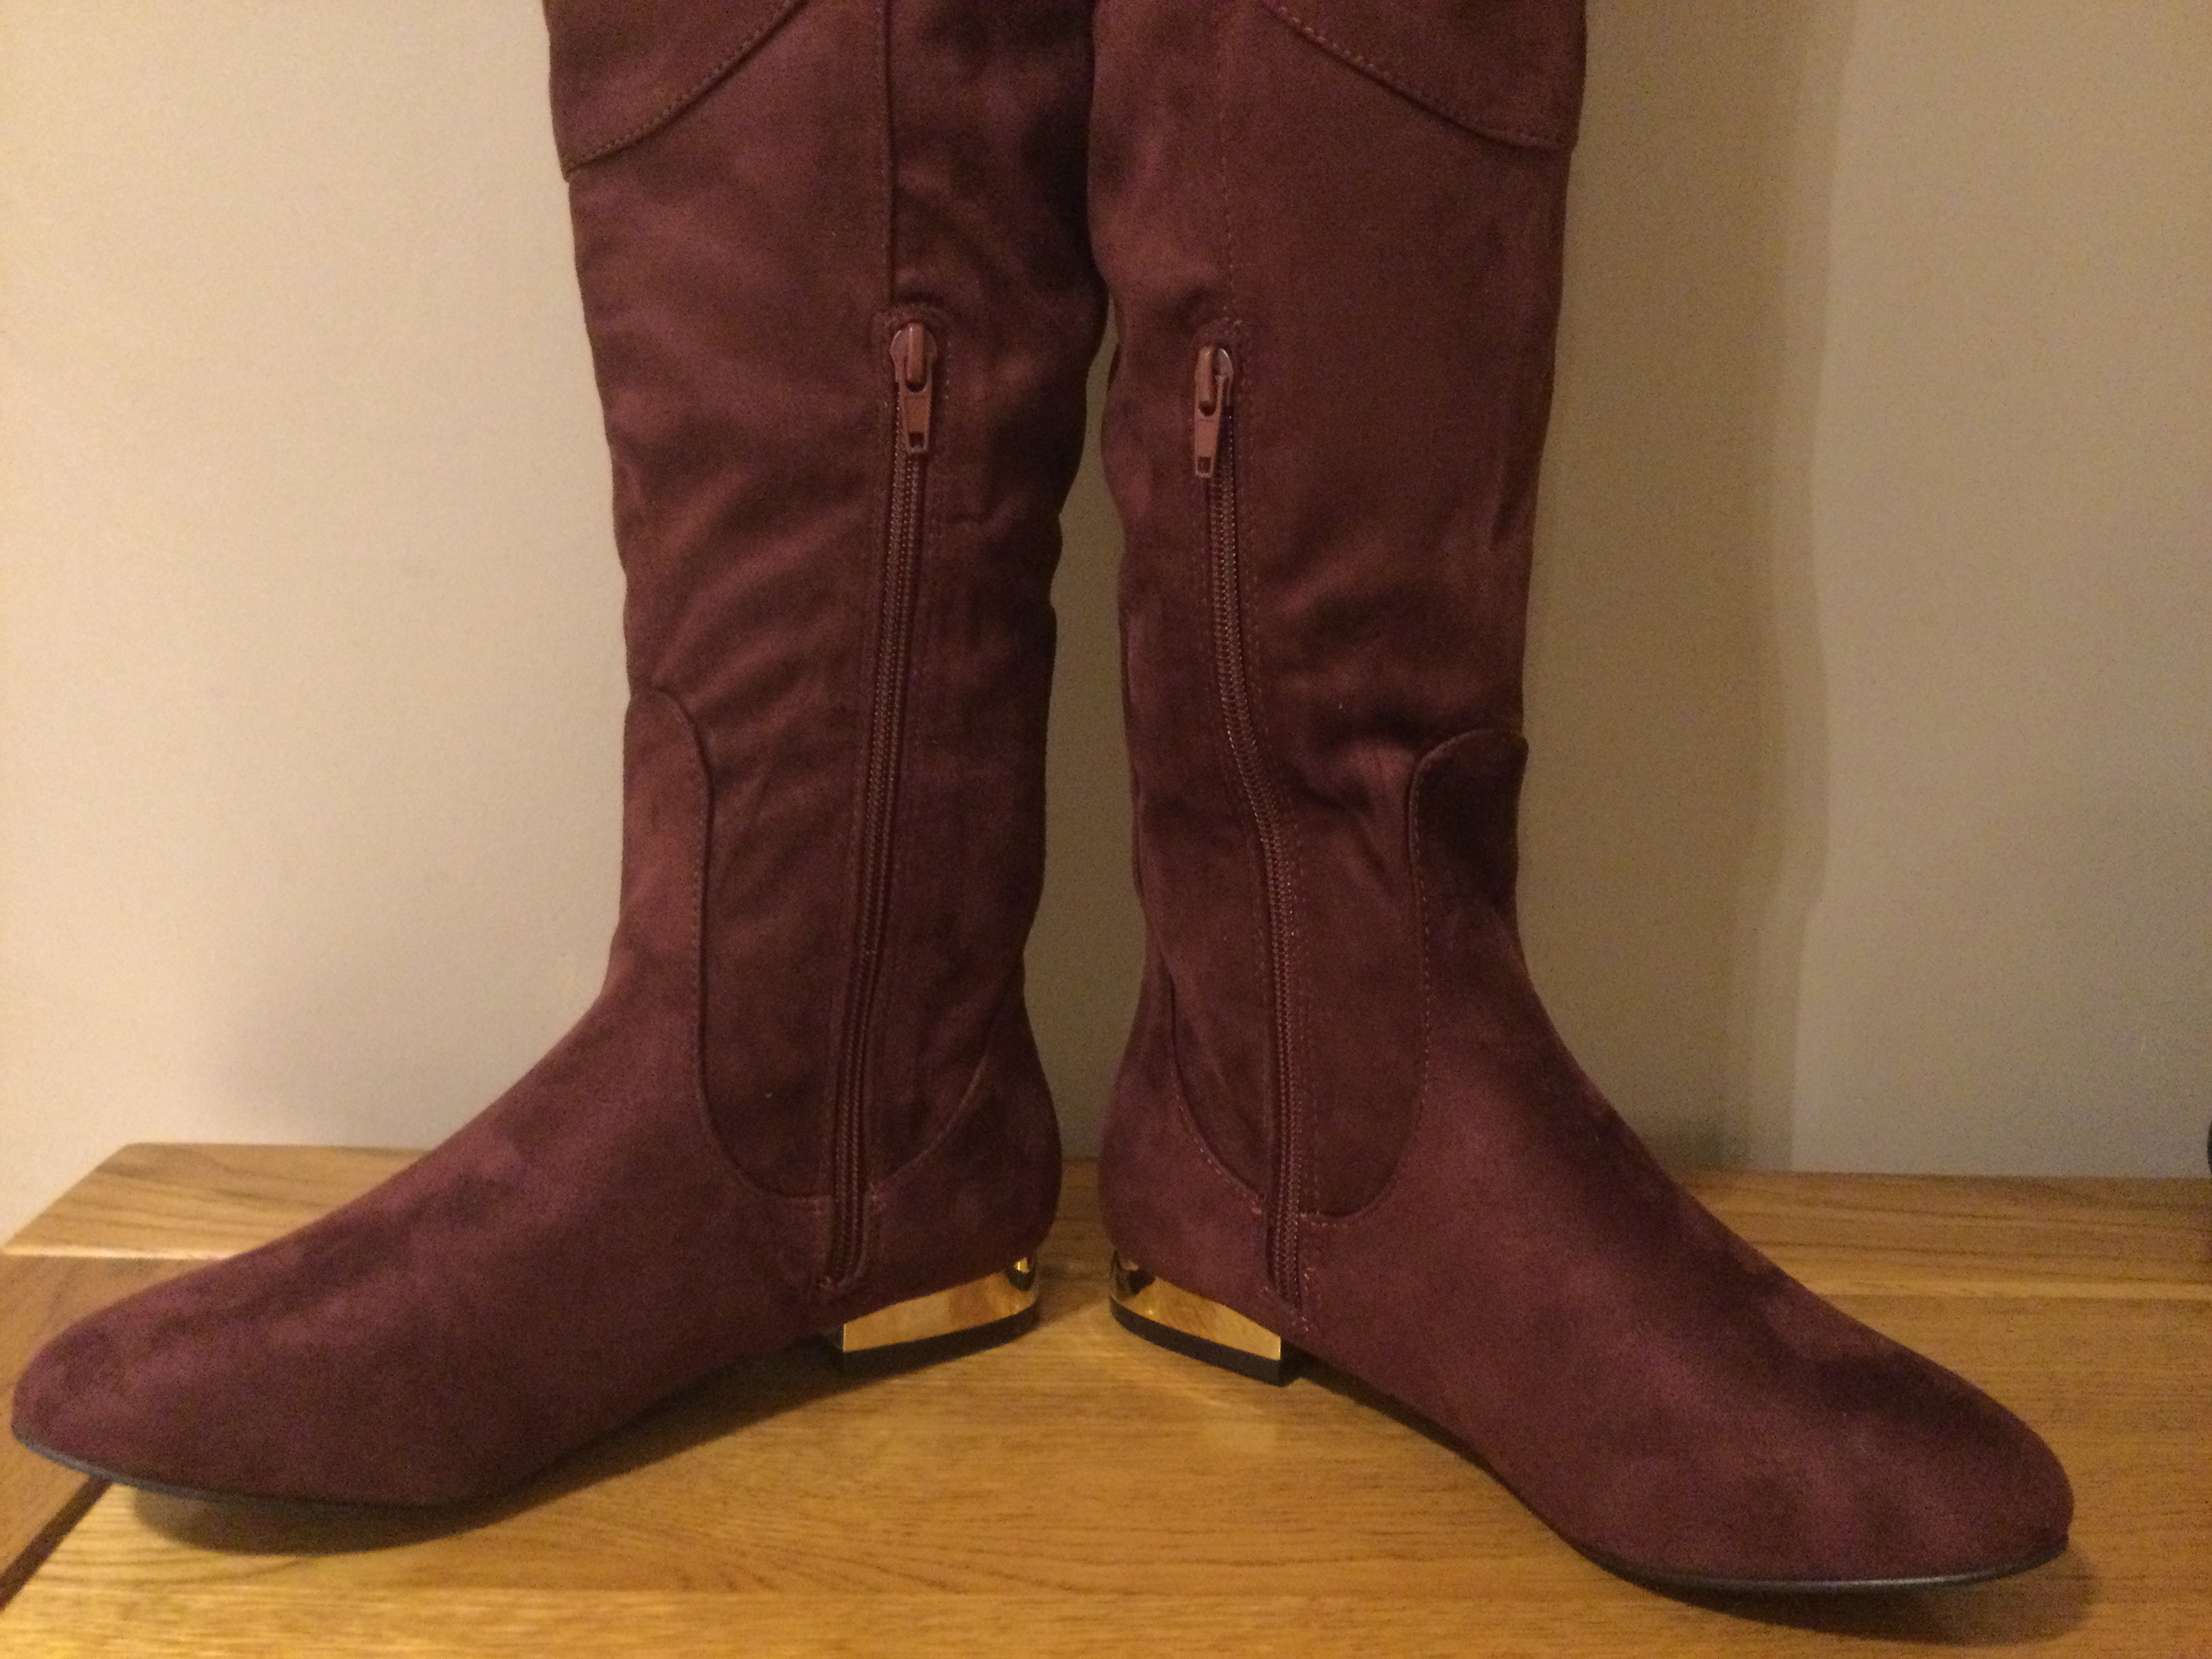 Dolcis “Katie” Long Boots, Low Block Heel, Size 5, Burgundy- New RRP £55.00 - Image 4 of 7